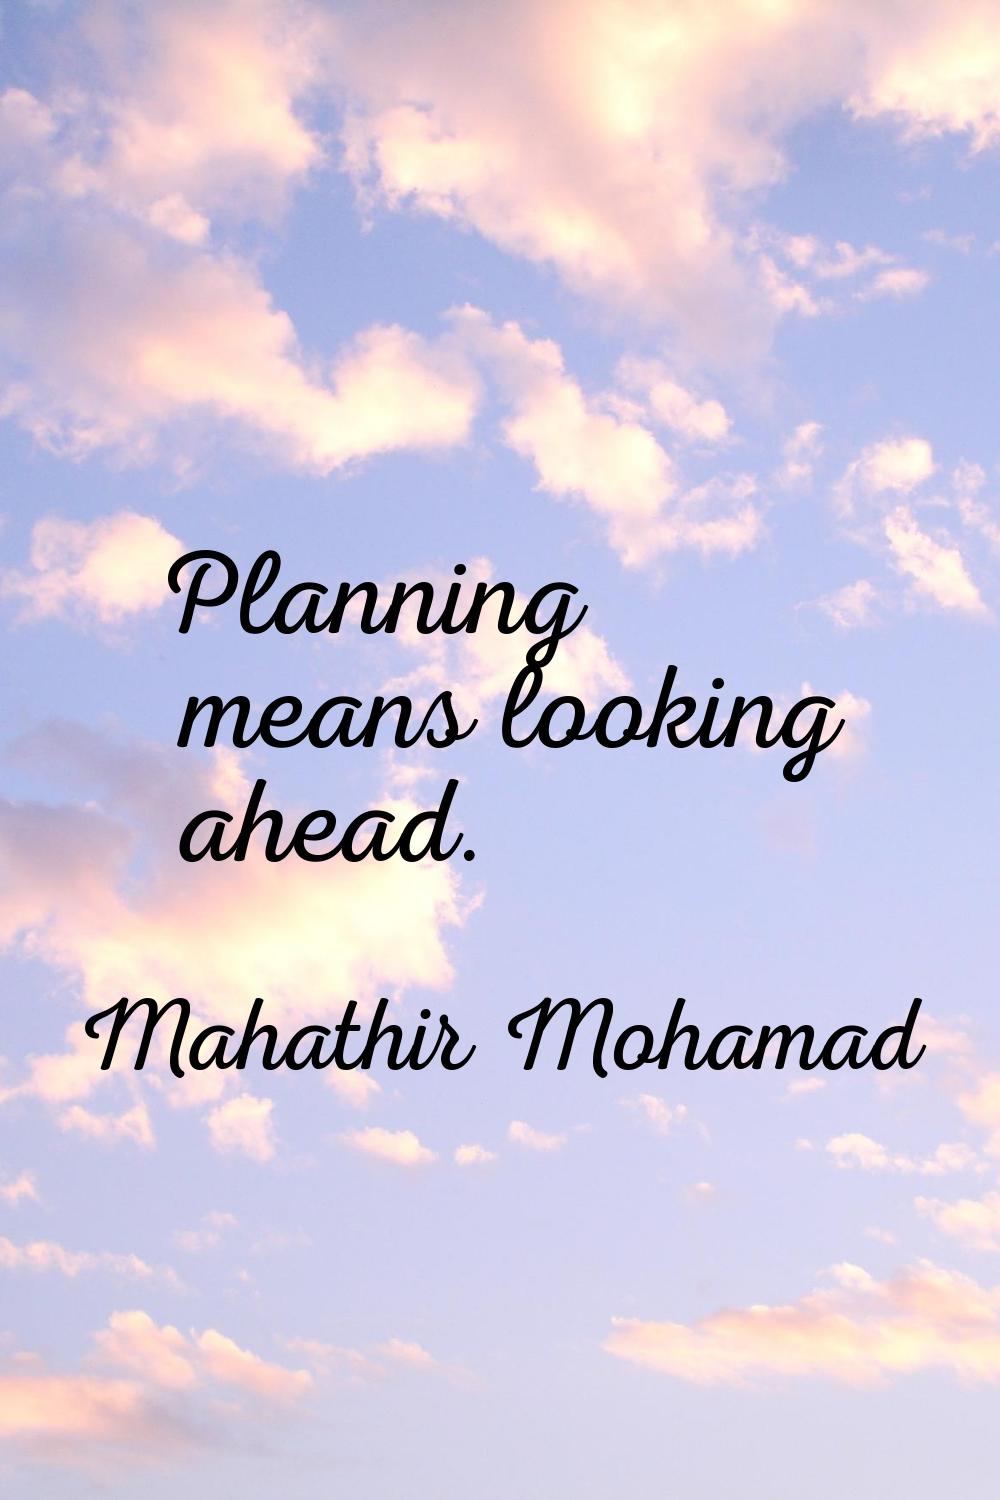 Planning means looking ahead.